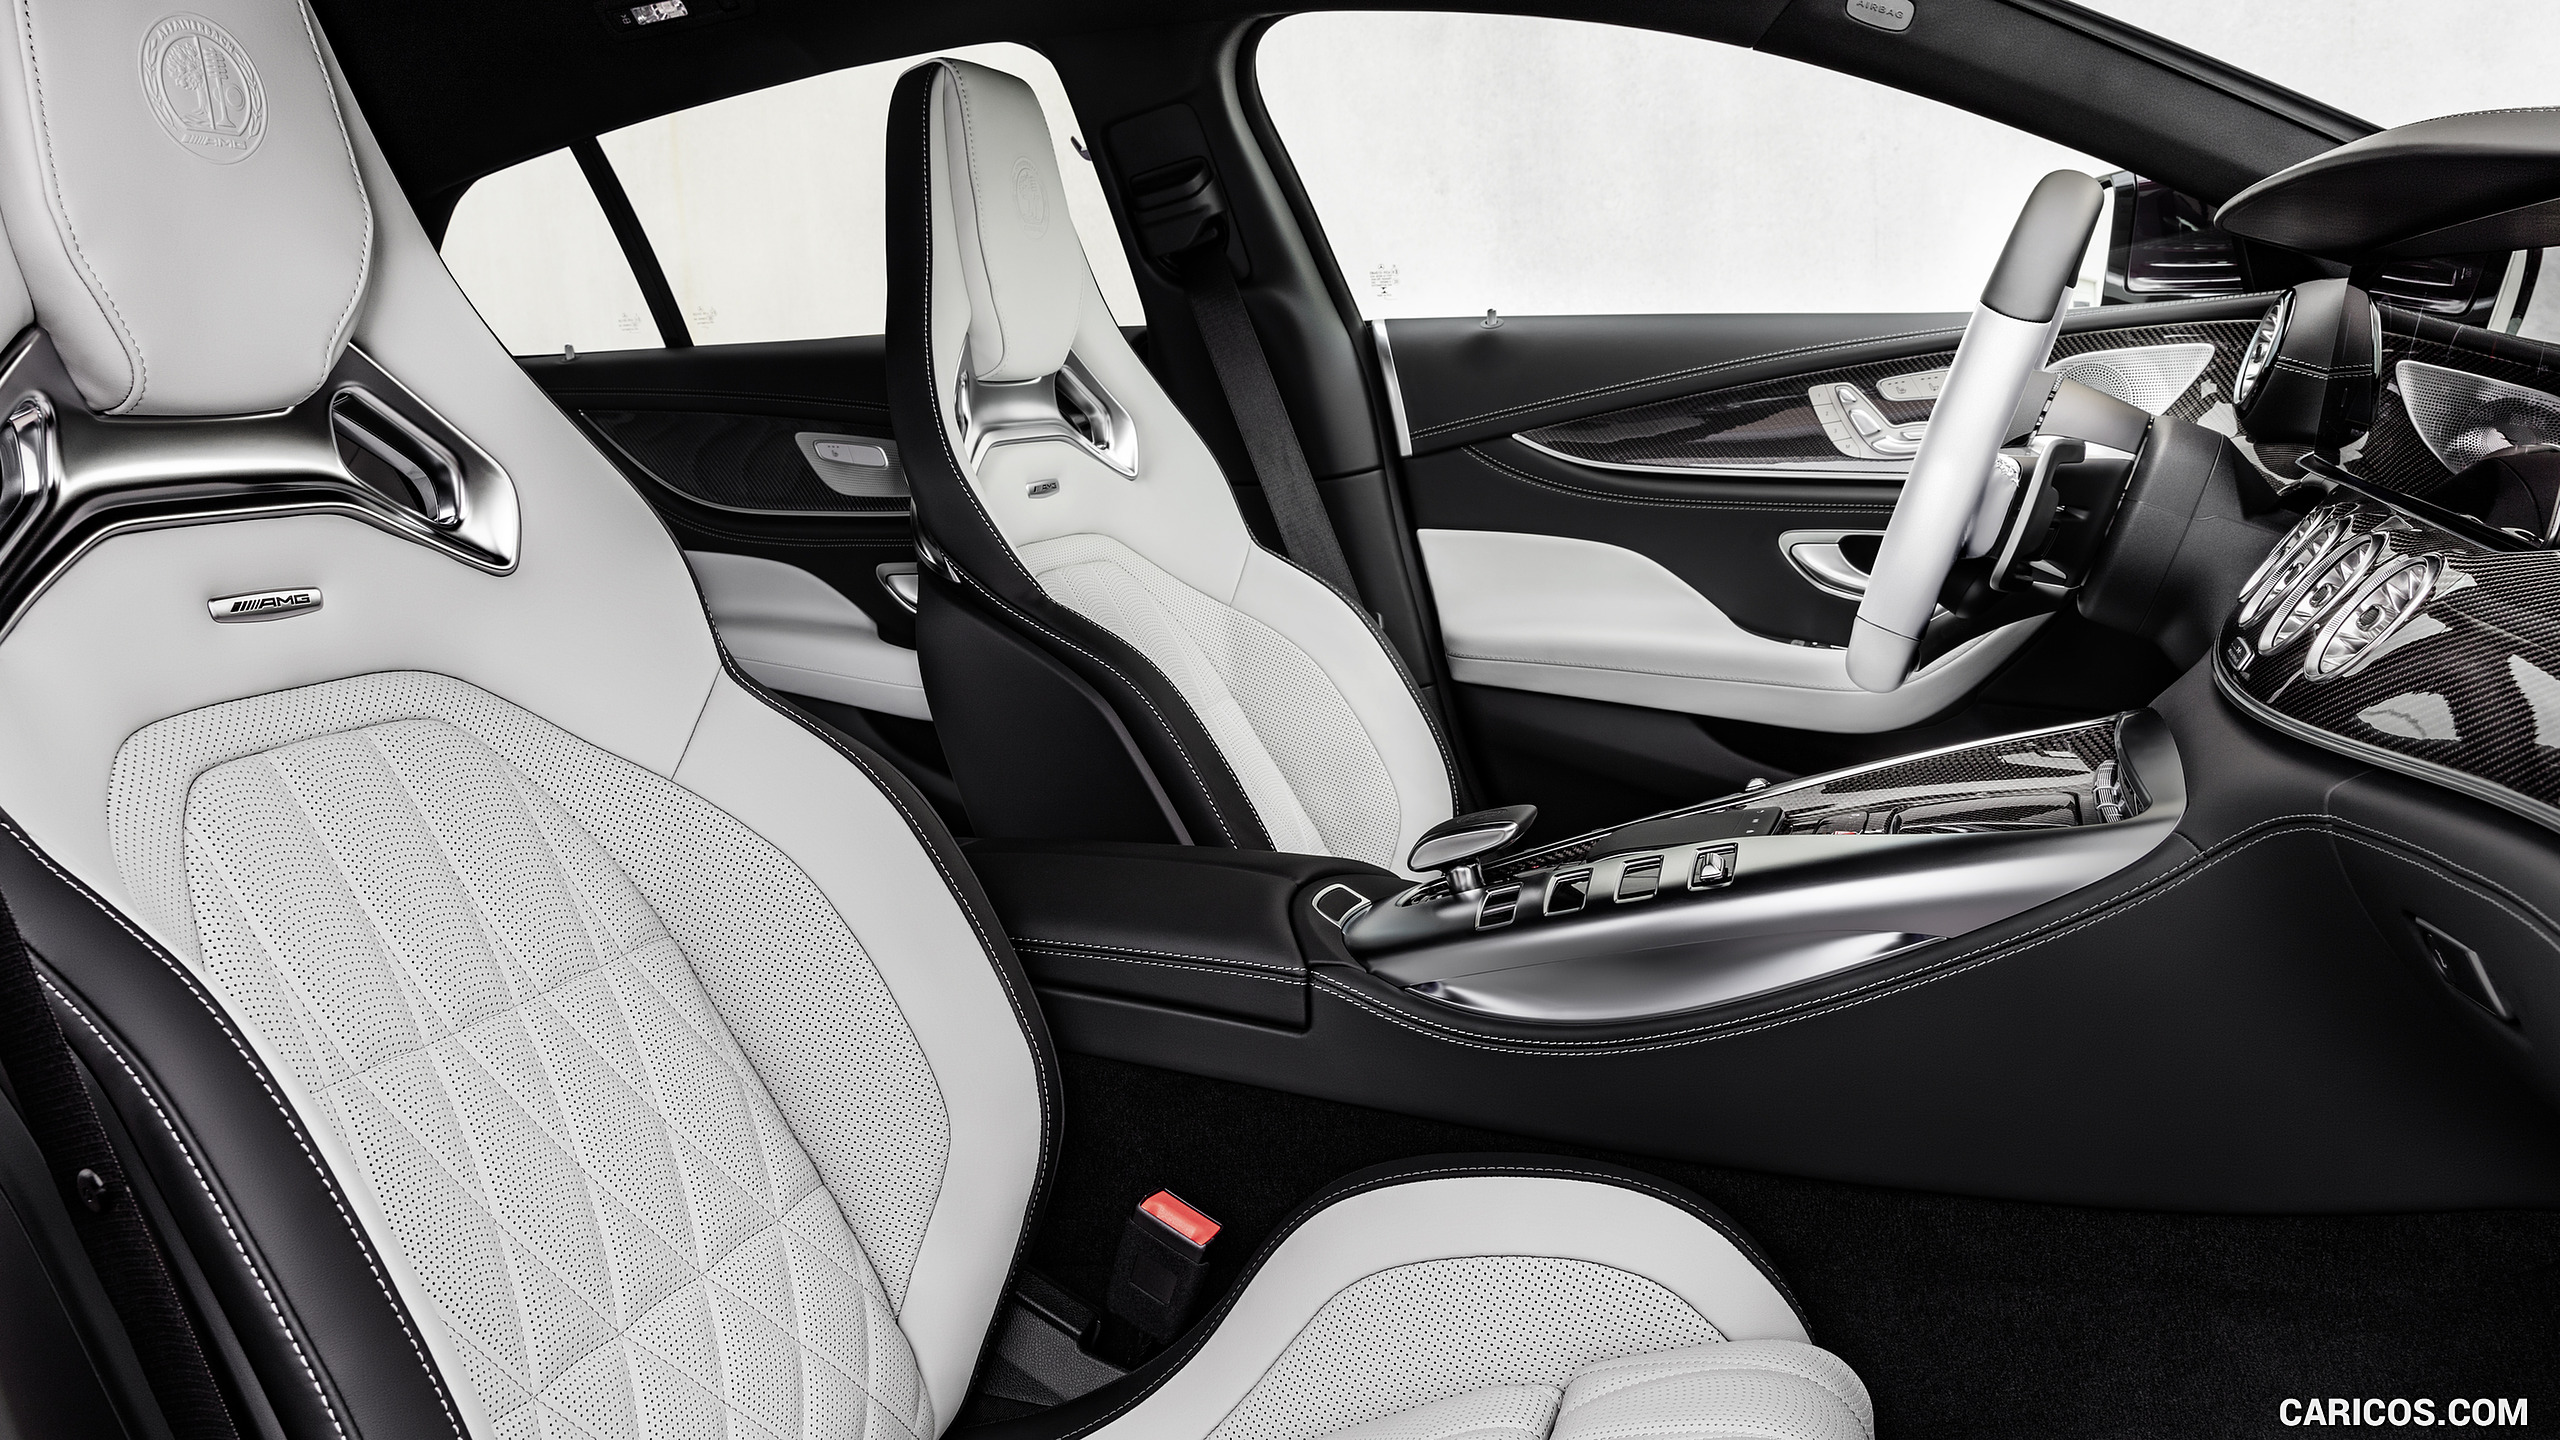 2022 Mercedes-AMG GT 53 4MATIC+ 4-Door Coupe - Interior, Front Seats, #16 of 35